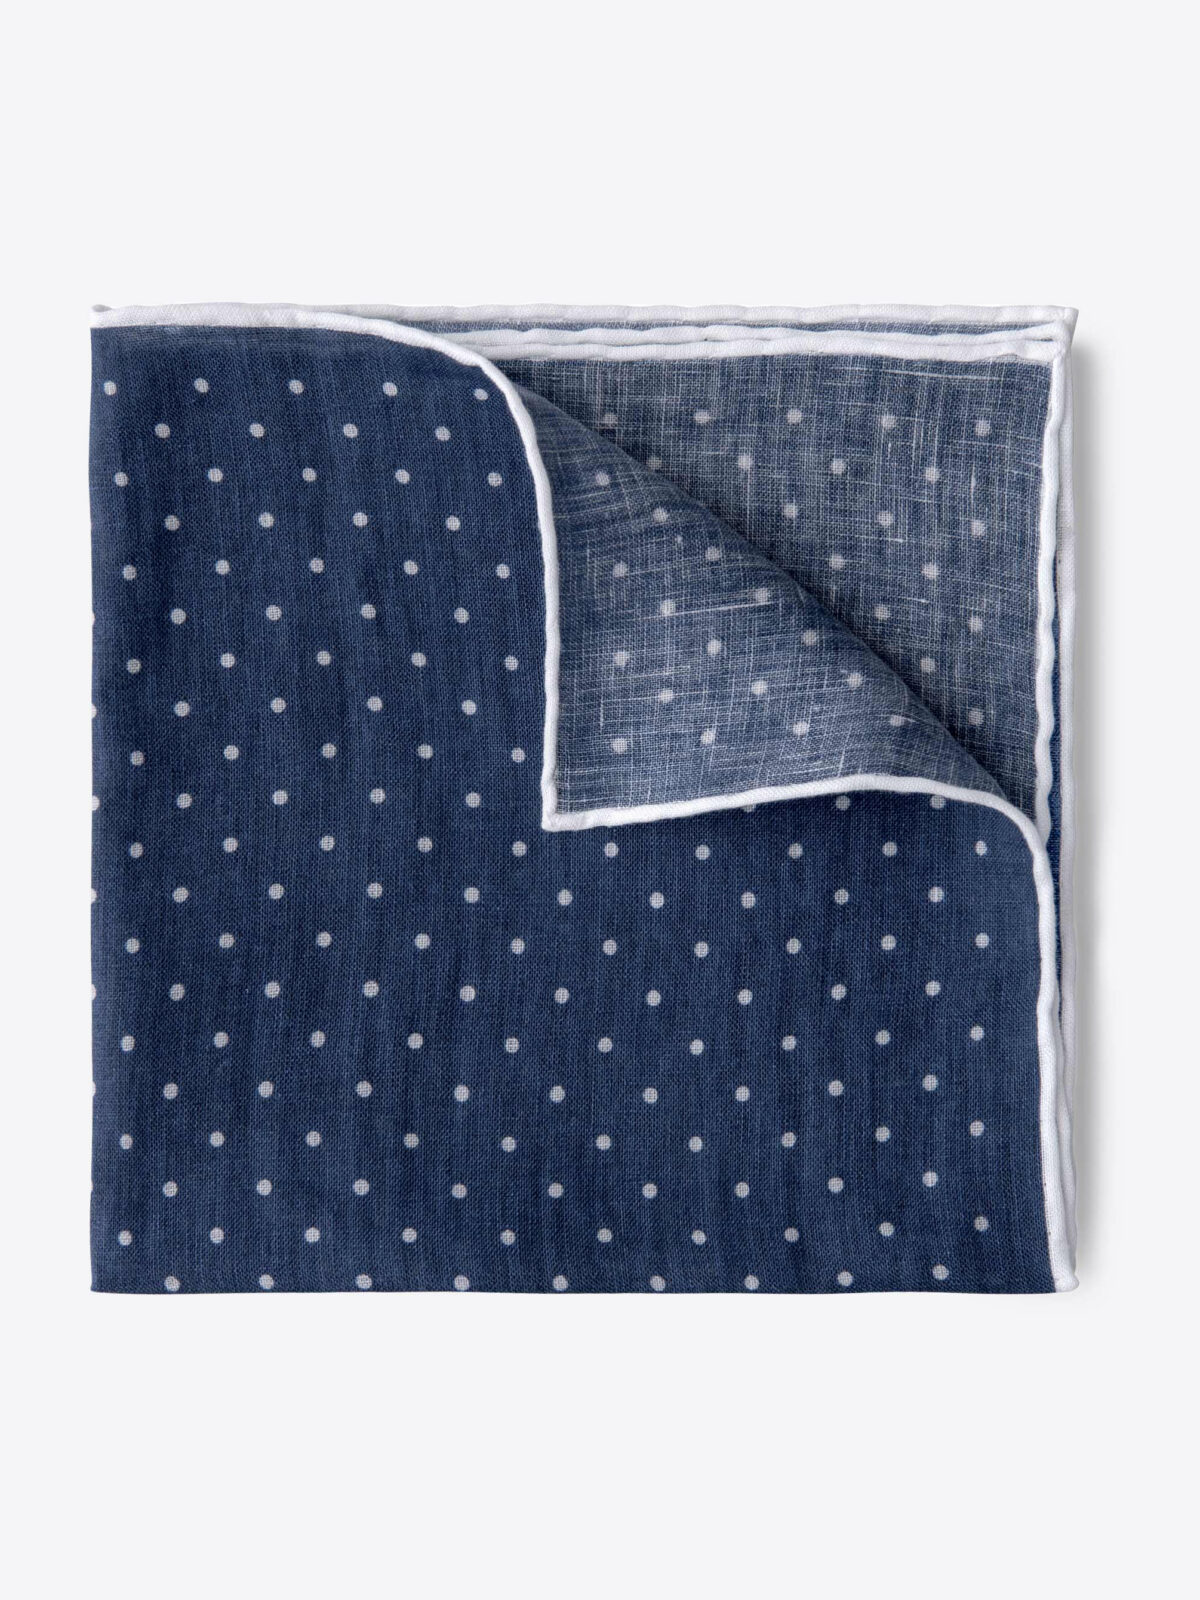 Faded Navy and White Dot Print Linen Pocket Square